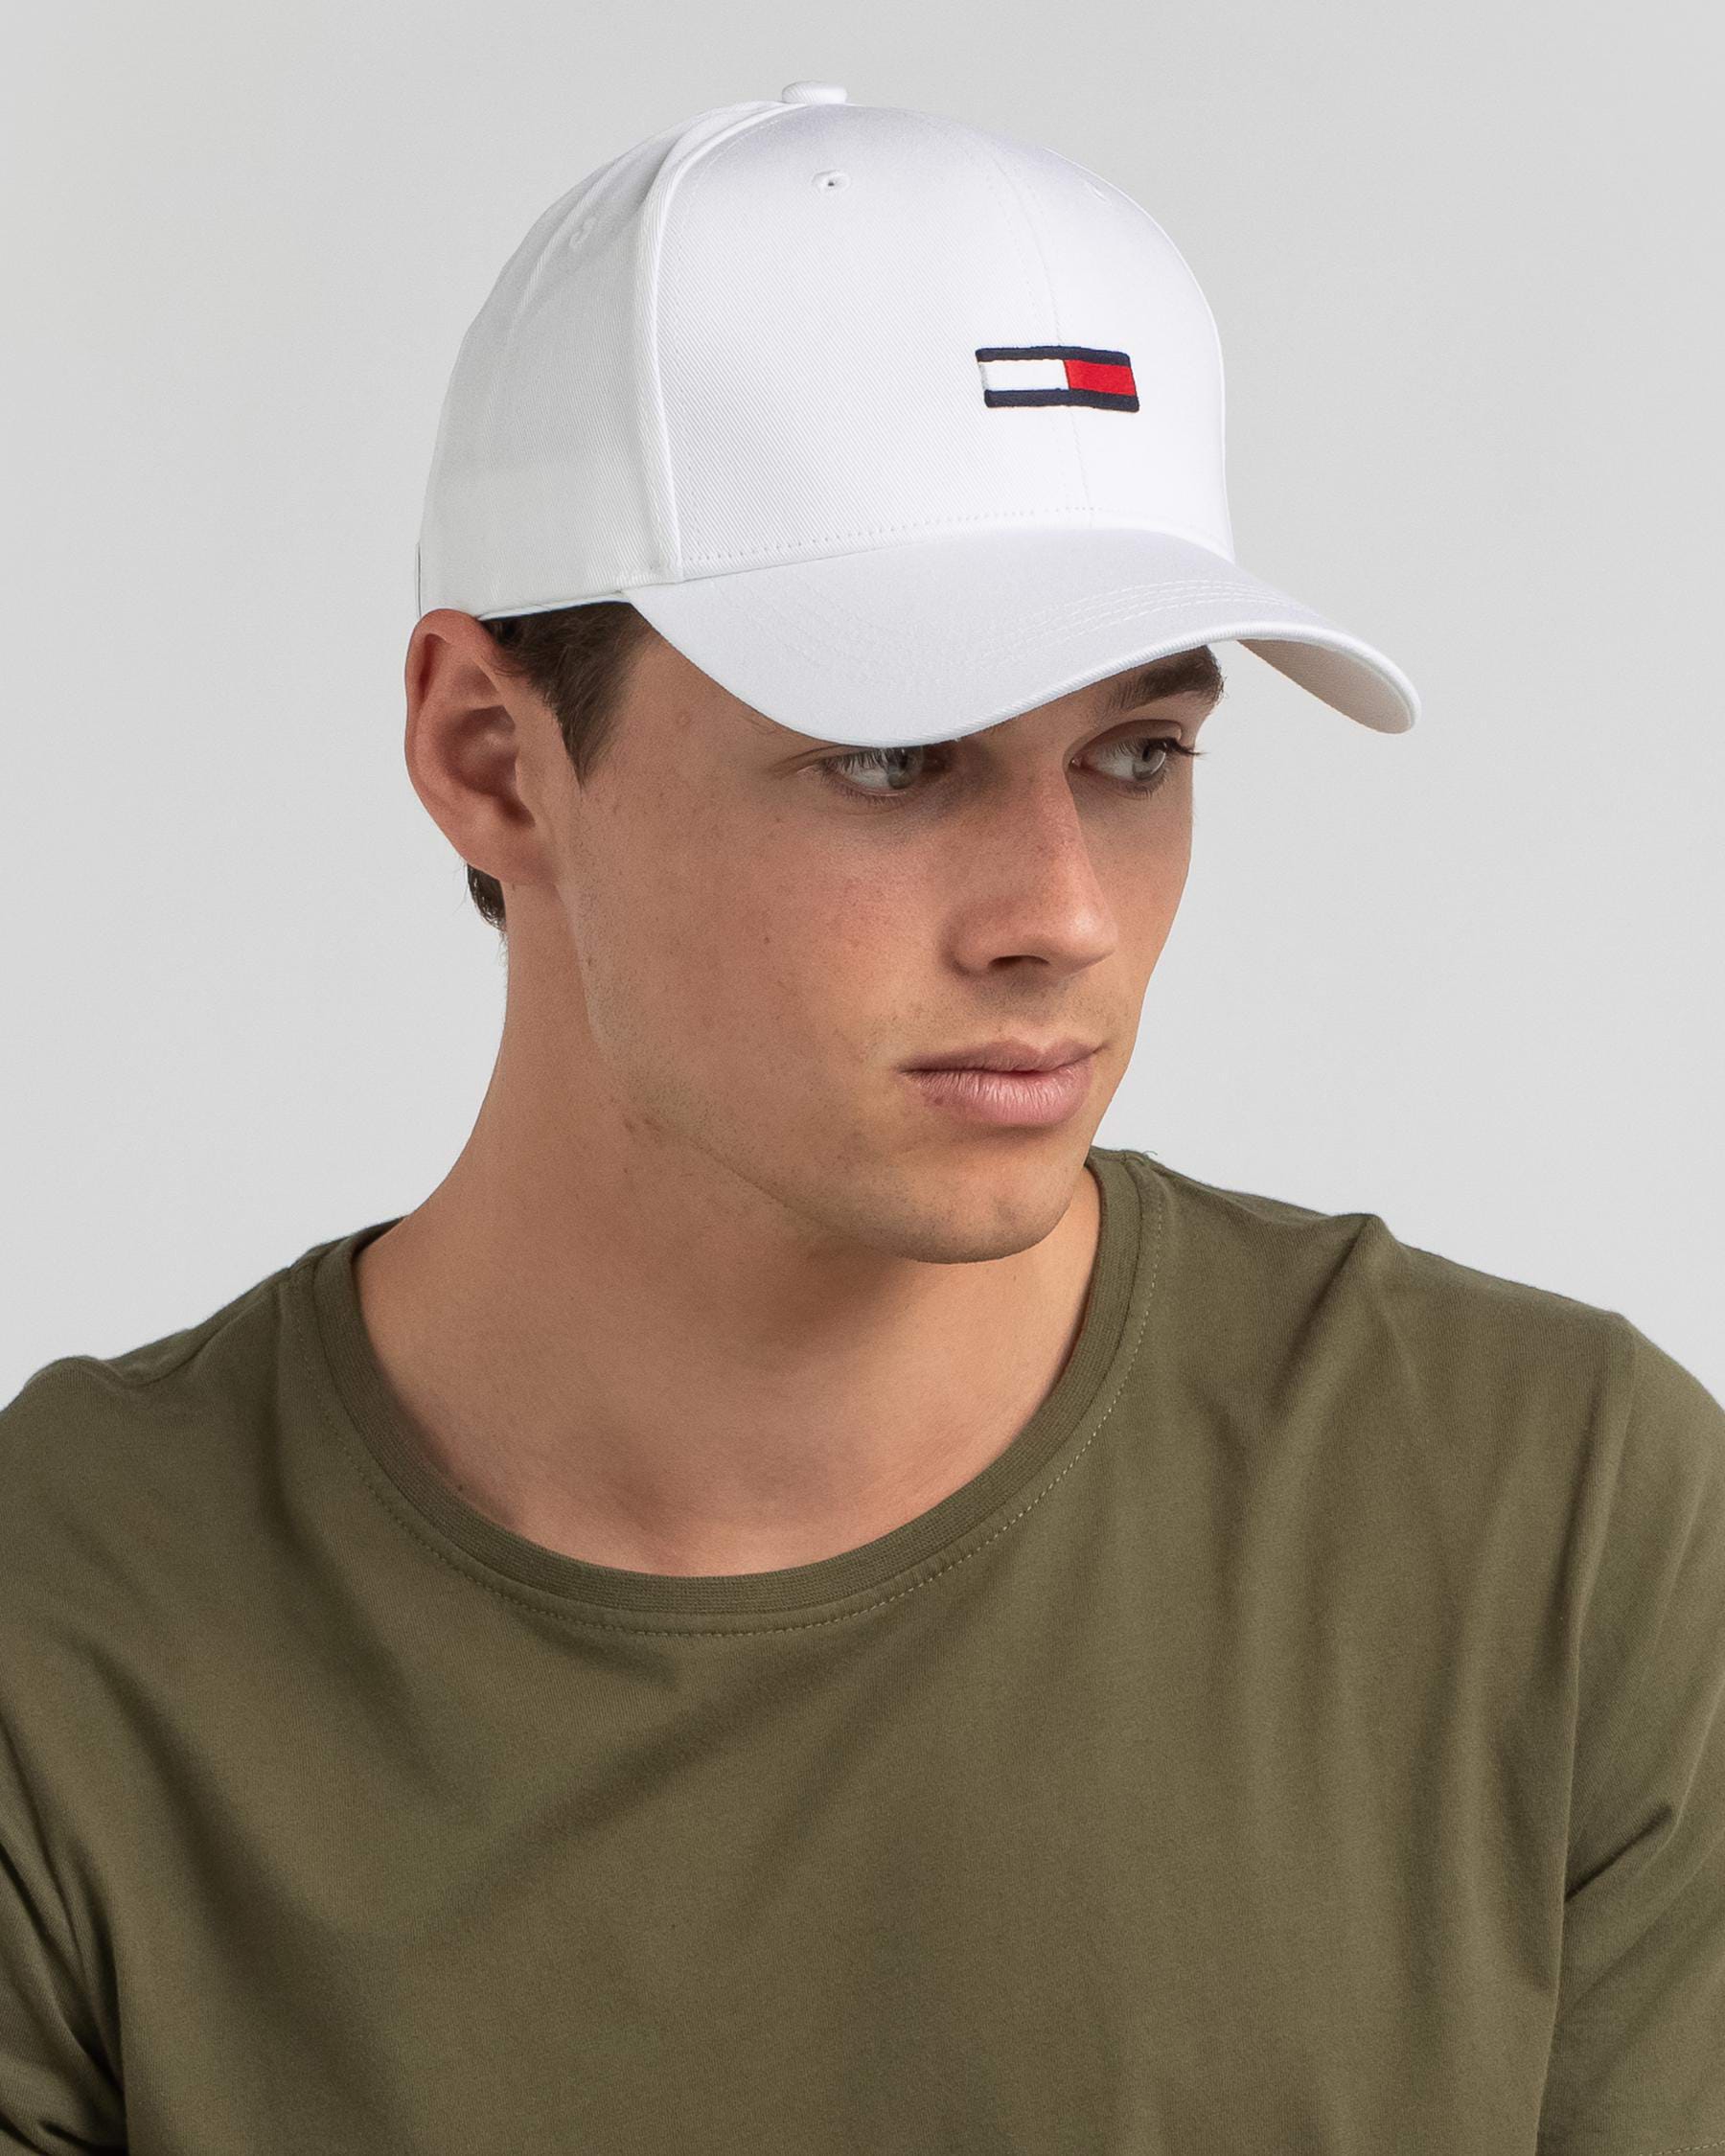 Tommy Hilfiger TJM Flag Cap - States City & Easy FREE* Shipping In Returns United White Beach 